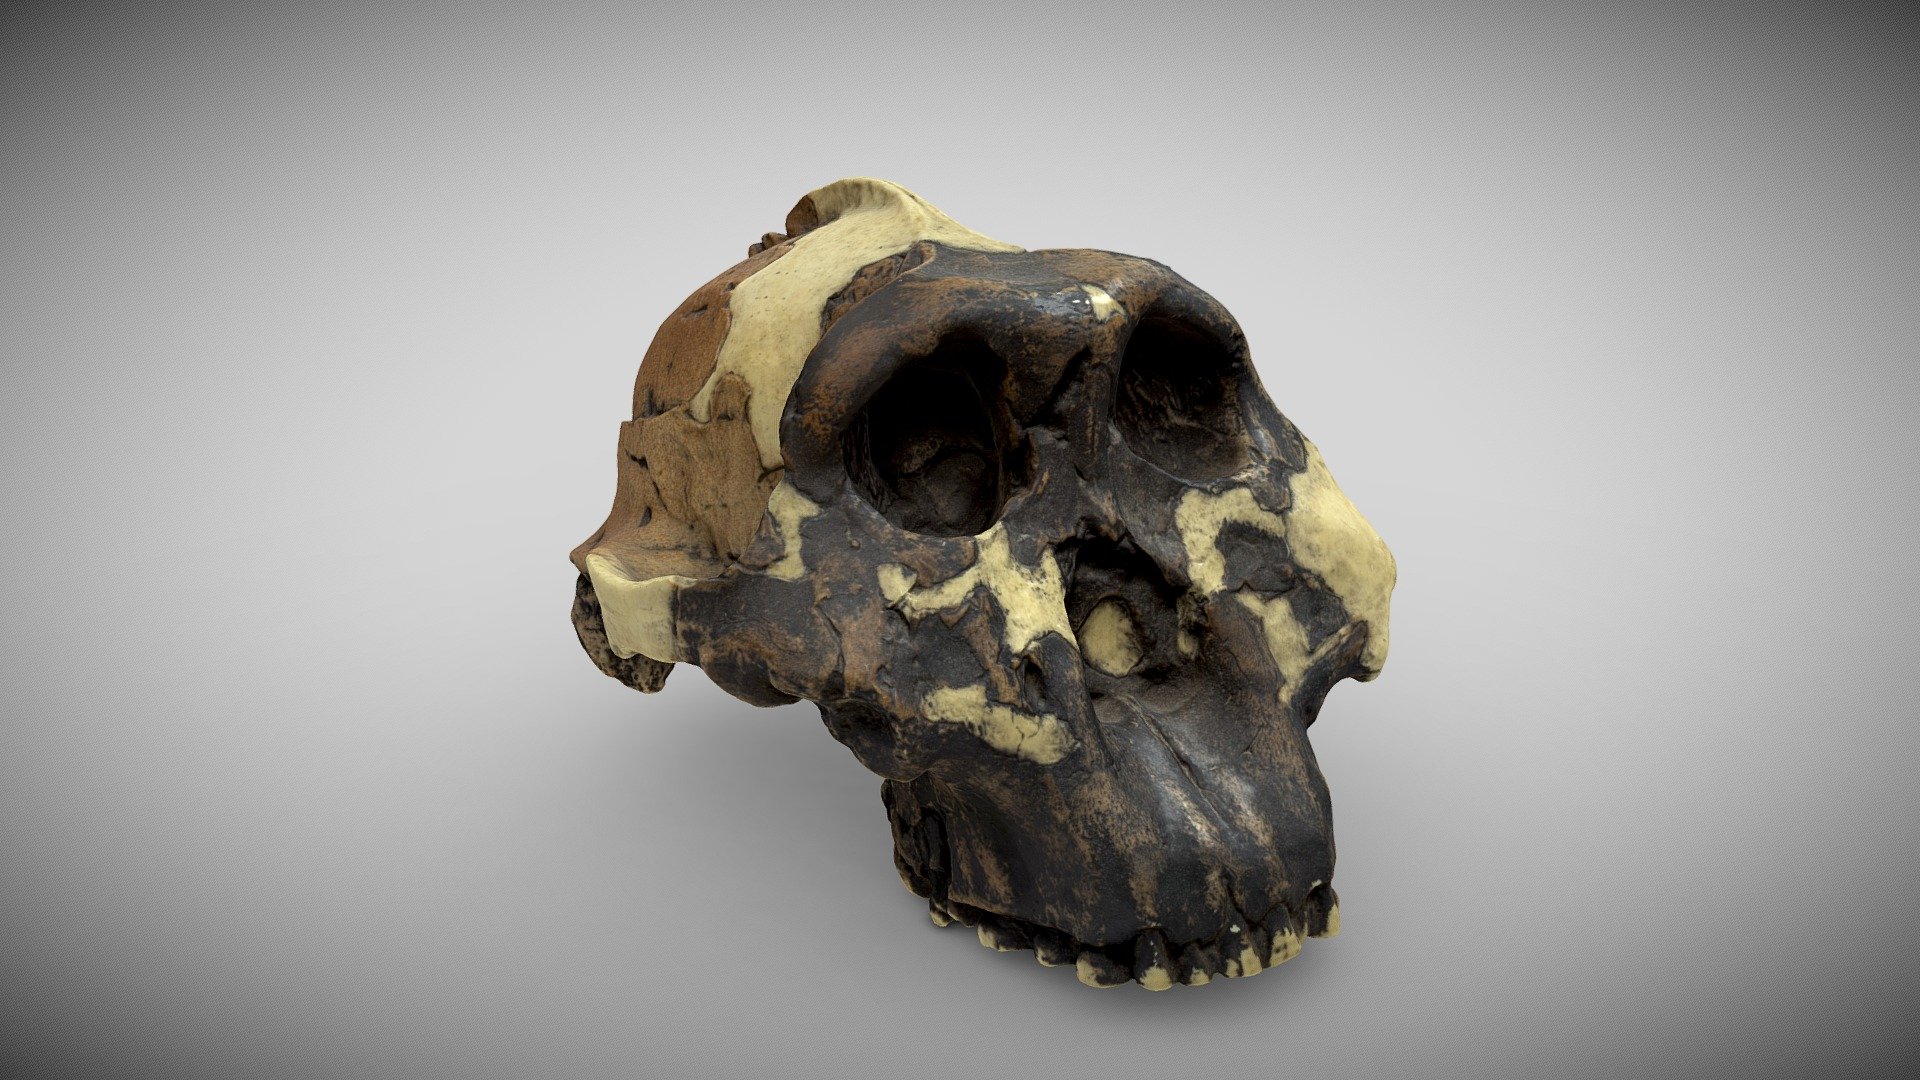 The Australopithecus boisei skull, is the most famous fossil from Olduvai Gorge, Tanzania. OH 5 was discovered by Mary Leakey in 1959 and originally classified as Zinjanthropus boisei by L. Leakey in Nature later that year. The accepted genus name has since changed to Australopithecus, this fossil is also know by the genus name Paranthropus. This discovery spurred paleoanthropology toward a modern, multidisciplinary approach, and focused paleoanthropologists' attention on East Africa. Unique in hominid evolution, A. boisei's massive skull features a wide, concave face, enormous, flat molars (about 4 times as big as modern H. sapiens) and cranial adaptations for powerful chewing, hence its nickname, Nutcracker Man. Note the sagittal crest and extremely large area for muscle attachments on the zygomatic arch. The thick jaw allowed for the species' exceptional chewing capabilities. Cranial capacity of this individual is 530 cc 3d model